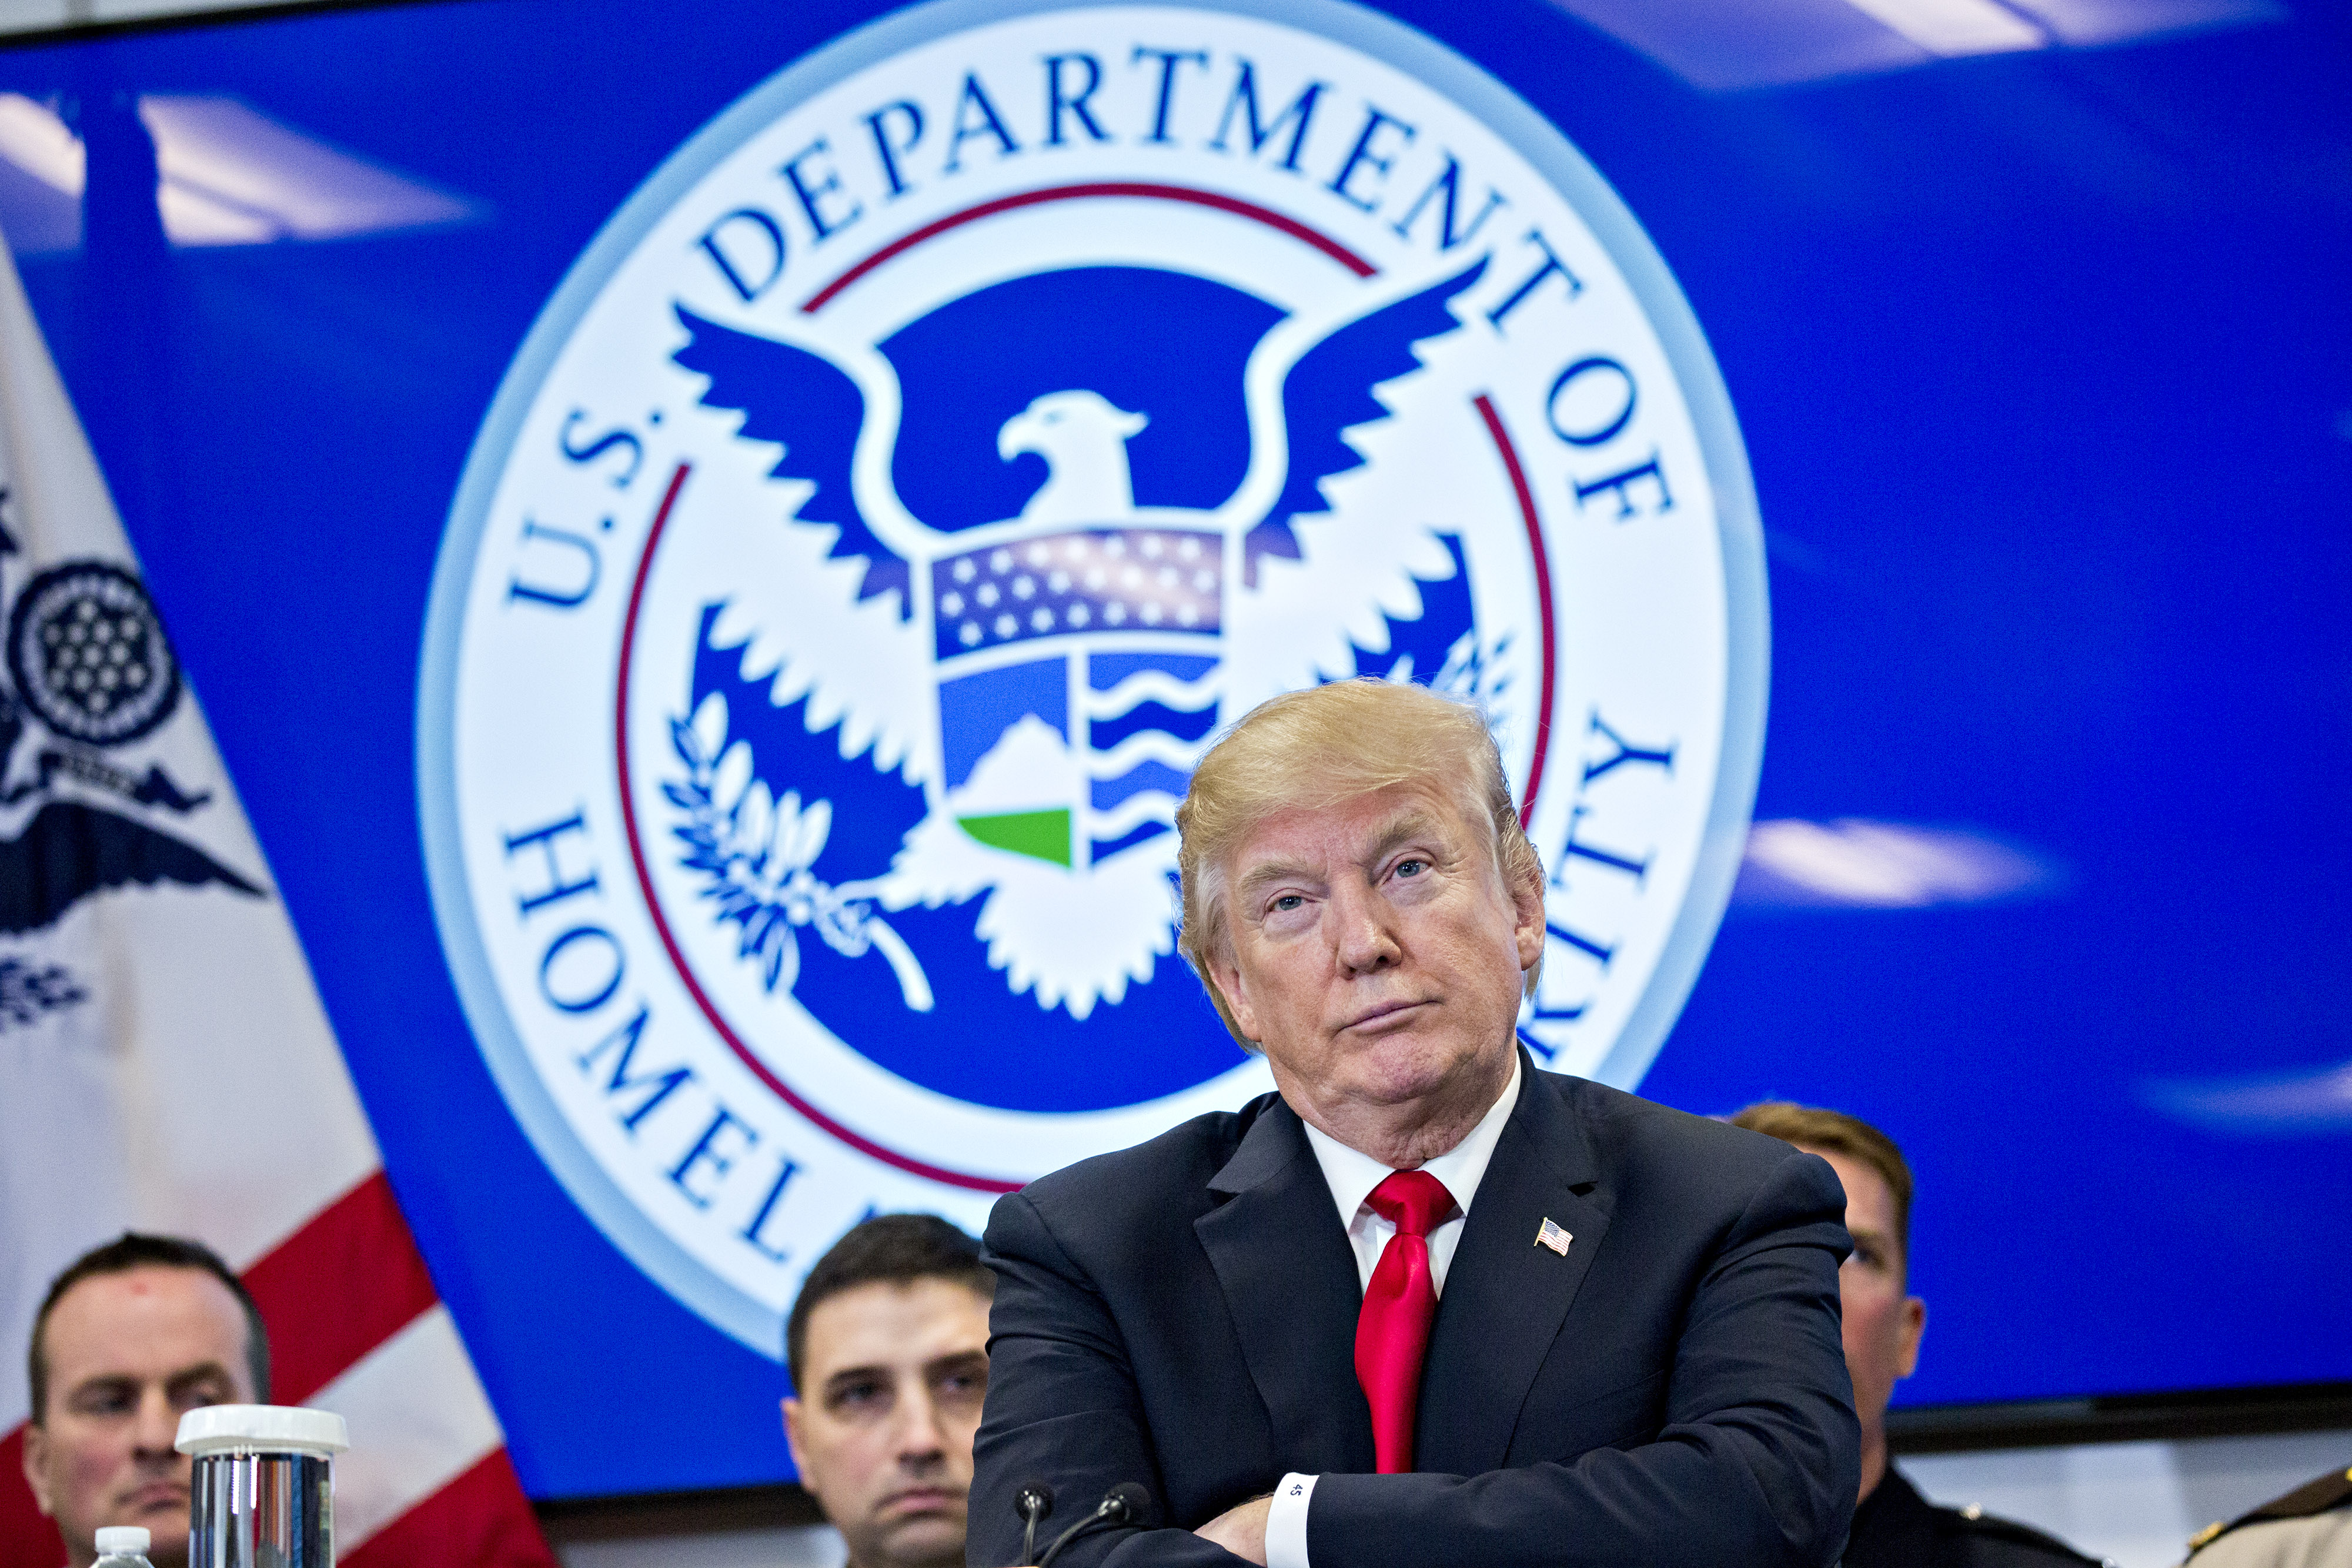 U.S. President Donald Trump listens while participating in a Customs and Border Protection (CBP) roundtable discussion after touring the CBP National Targeting Center February 2, 2018 in Sterling, Virginia. Trump is looking to ratchet up pressure on lawmakers to consider the immigration proposal he unveiled in Tuesday's State of the Union using the visit as an opportunity to again argue his proposal would bolster the country's borders. (Photo by Andrew Harrer-Pool—Getty Images)